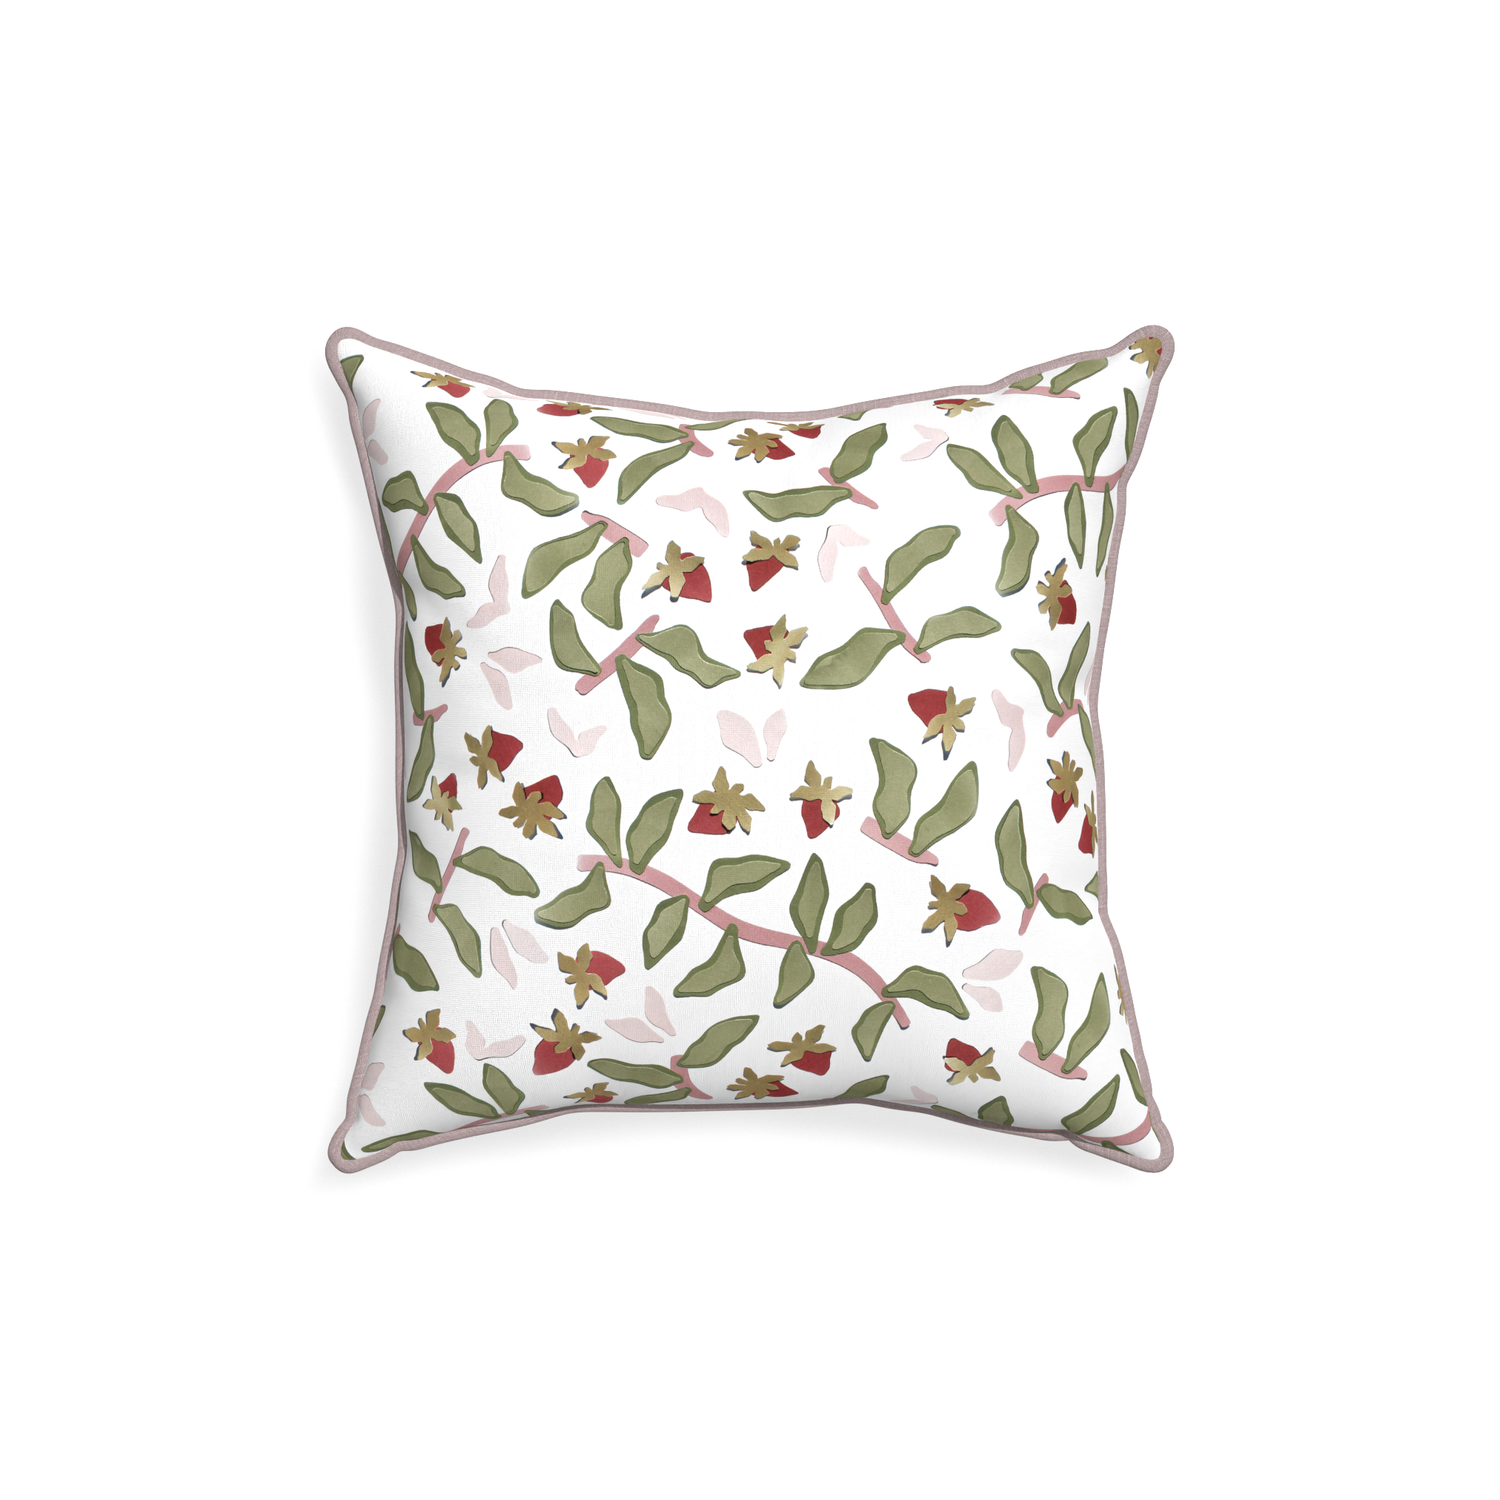 18-square nellie custom strawberry & botanicalpillow with orchid piping on white background